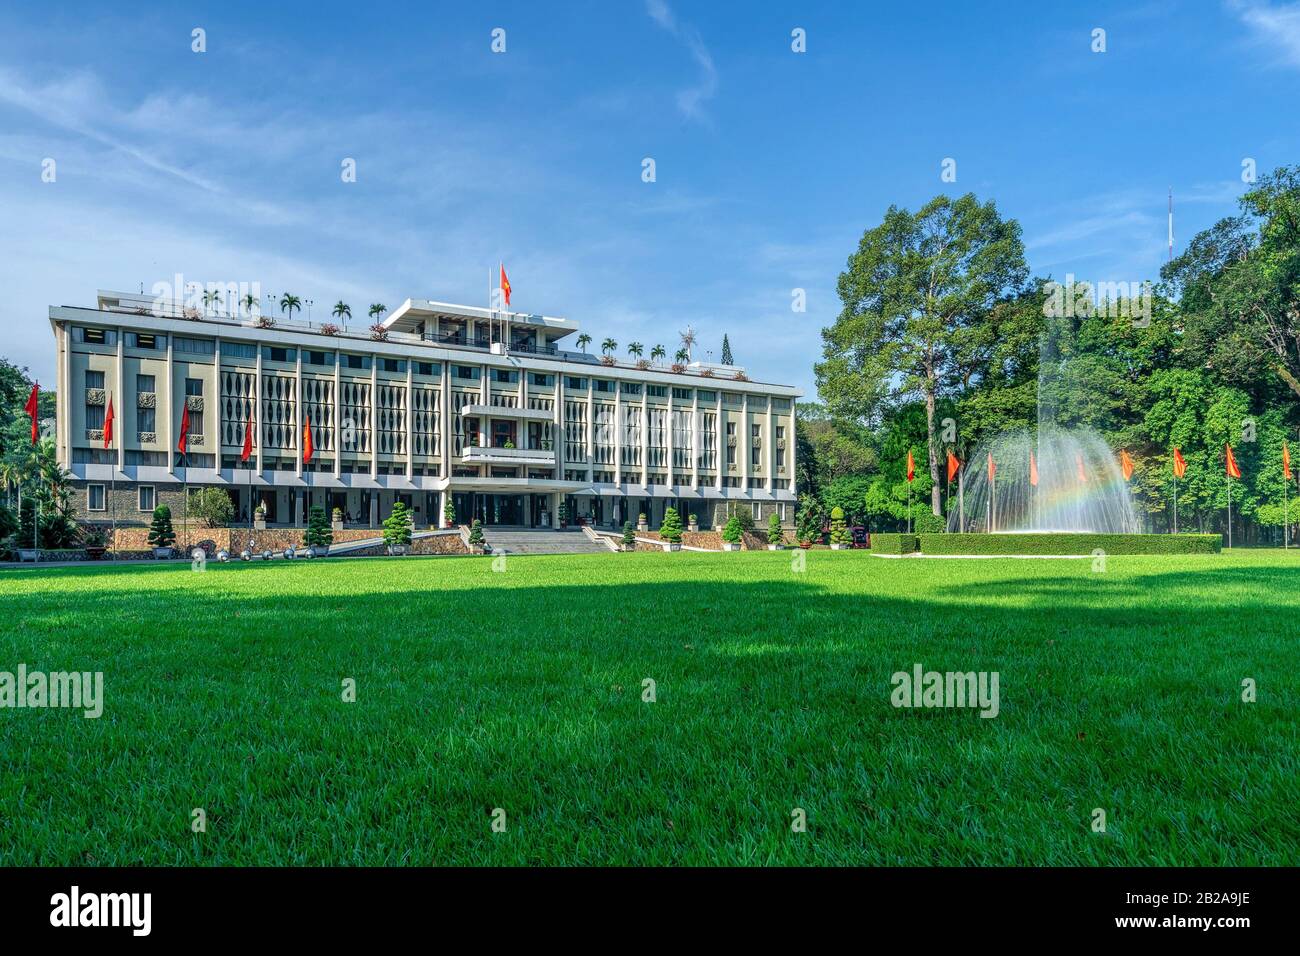 General view of Independence Palace or Reunification Palace and center Ho Chi Minh City, Vietnam Stock Photo